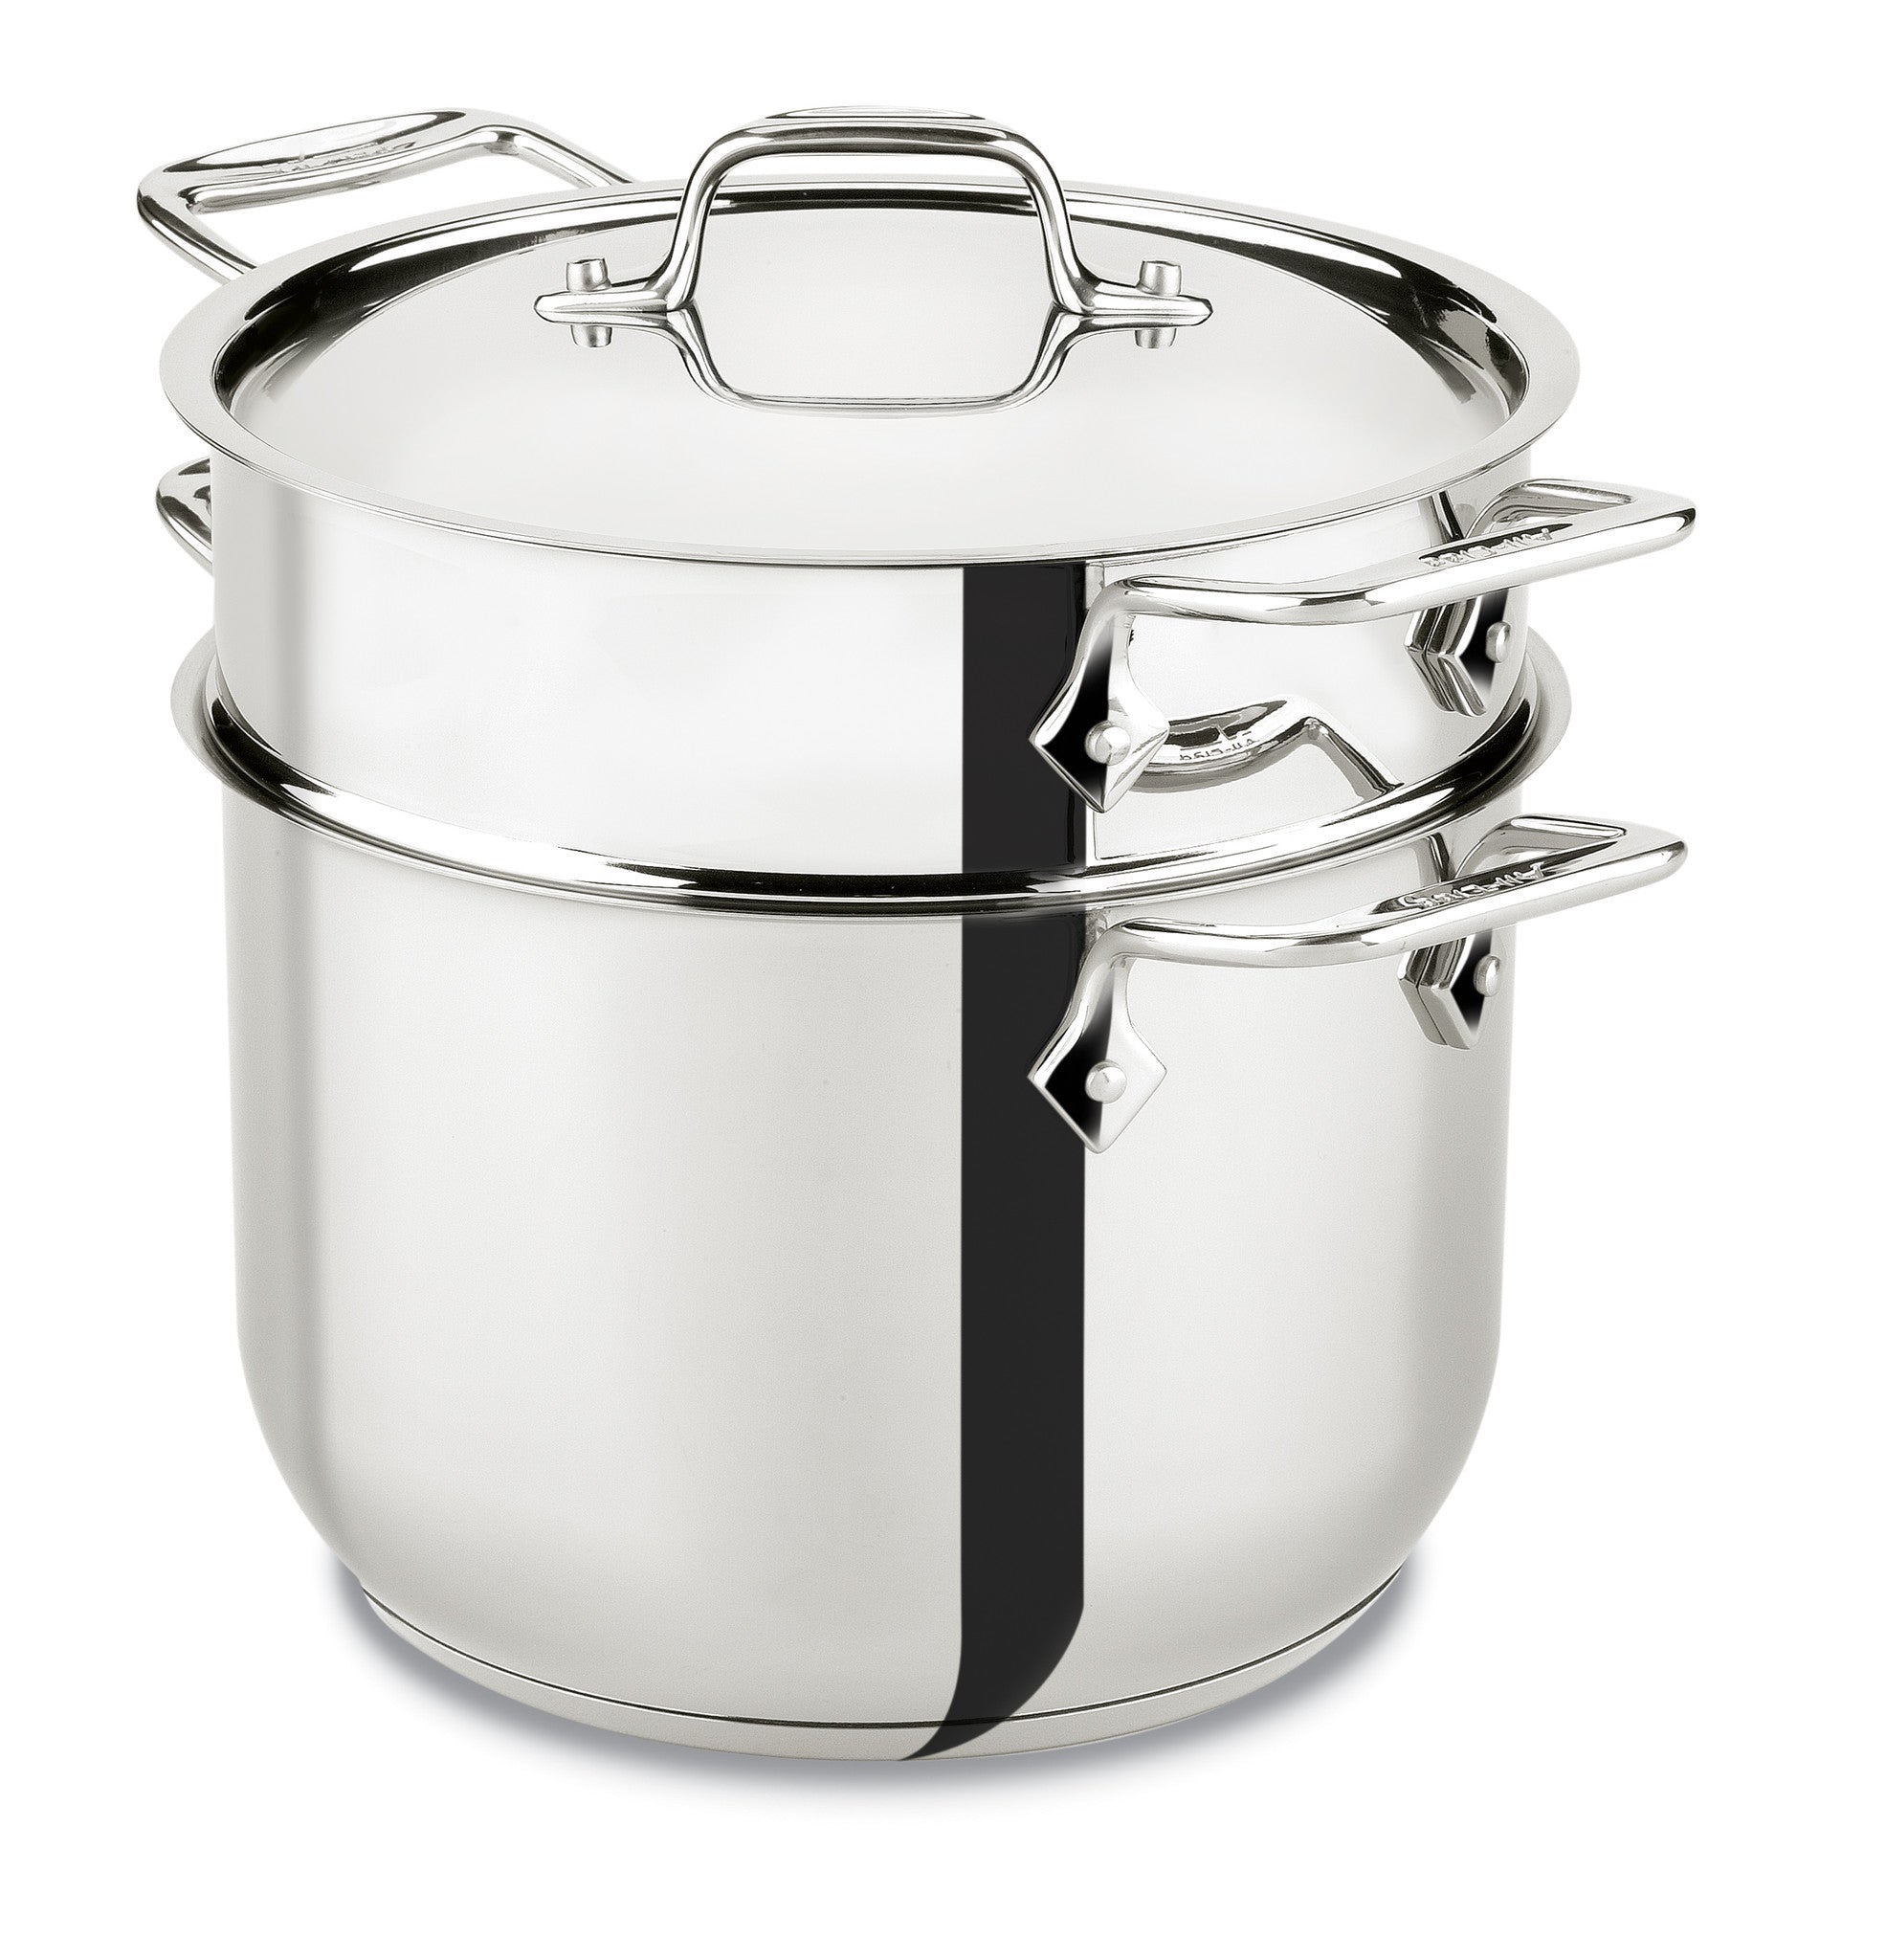 Stainless Clad Stock Pots  6 QT, 8 QT & 12 QT - Made In